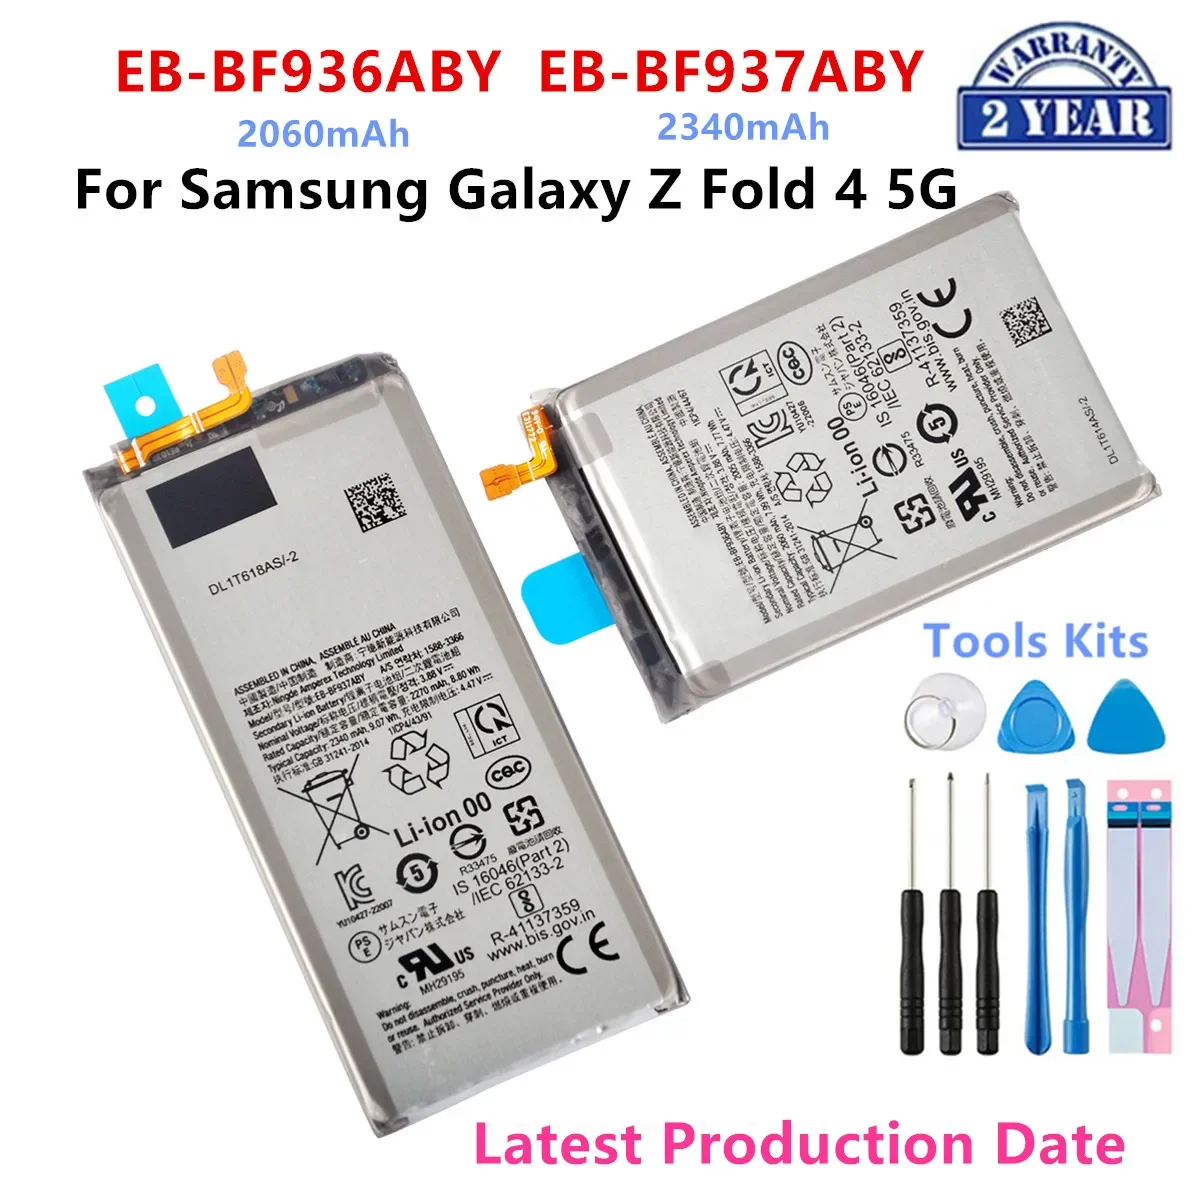 

Brand New EB-BF936ABY EB-BF937ABY Battery For Samsung Galaxy Z Fold 4 5G F936 F937 + Replacement Batteries+Tools